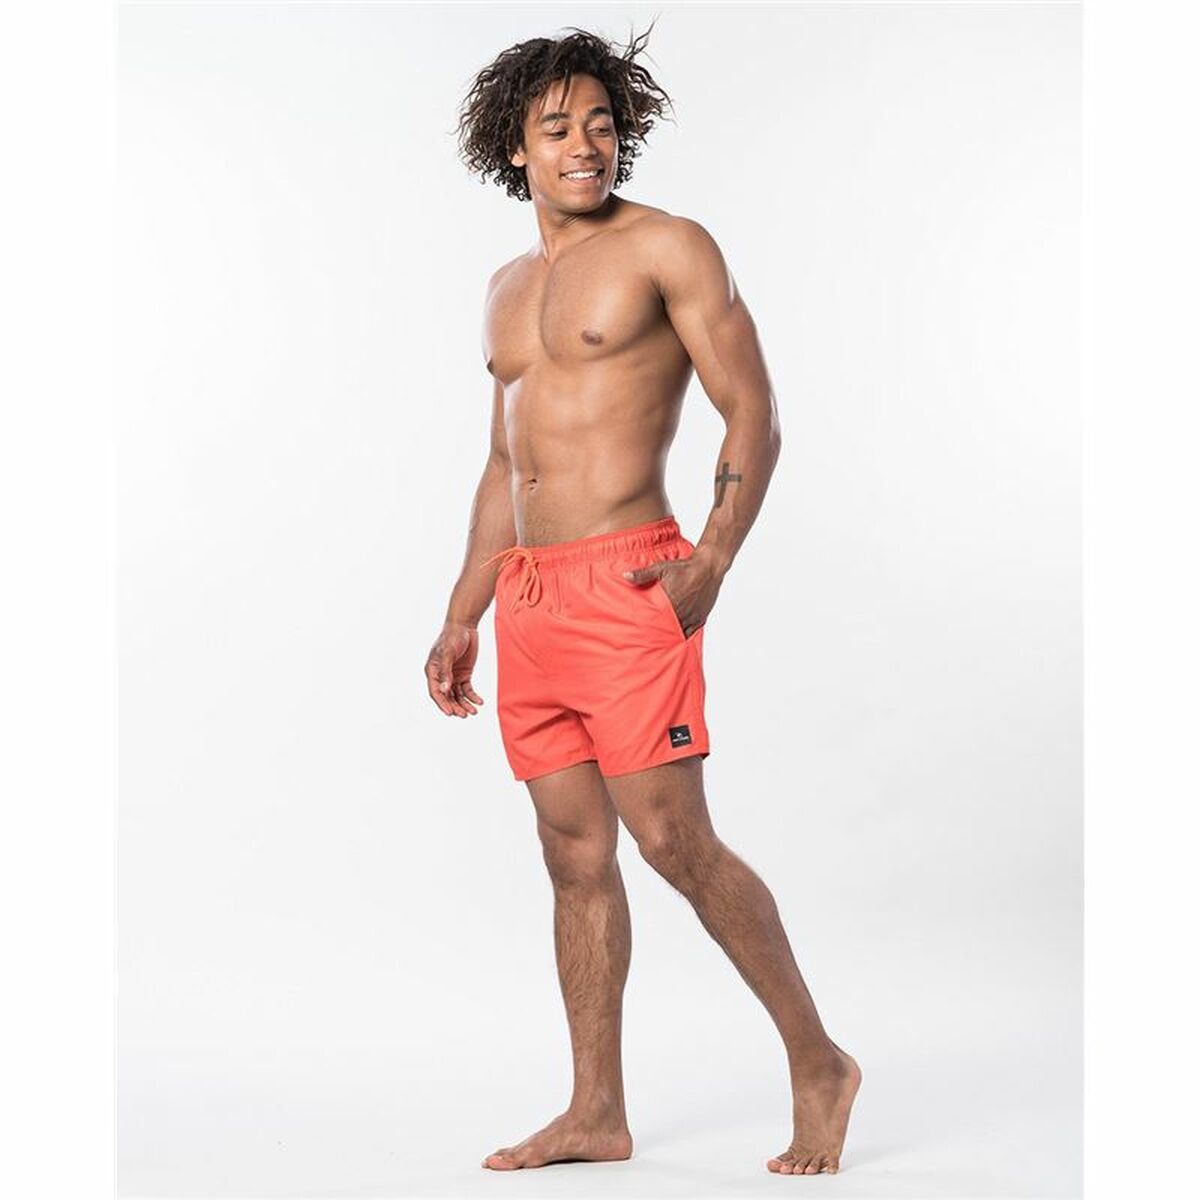 Herren Badehose Rip Curl Offset Volley Rot